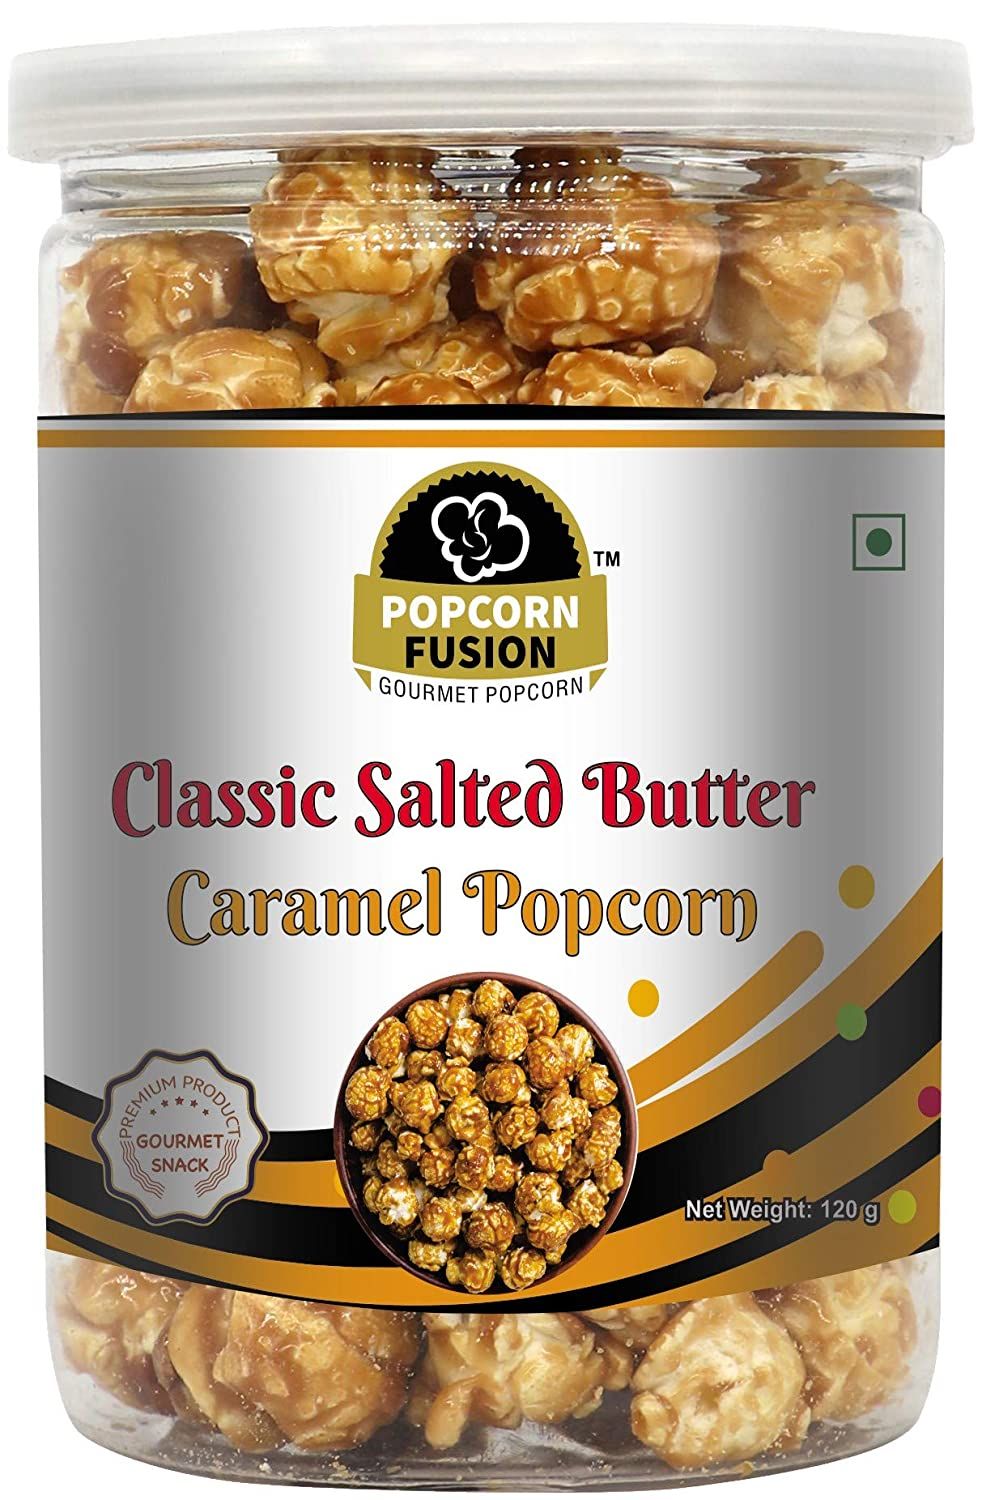 Popcorn Fusion Classic Salted Butter Caramel Popcorn Image